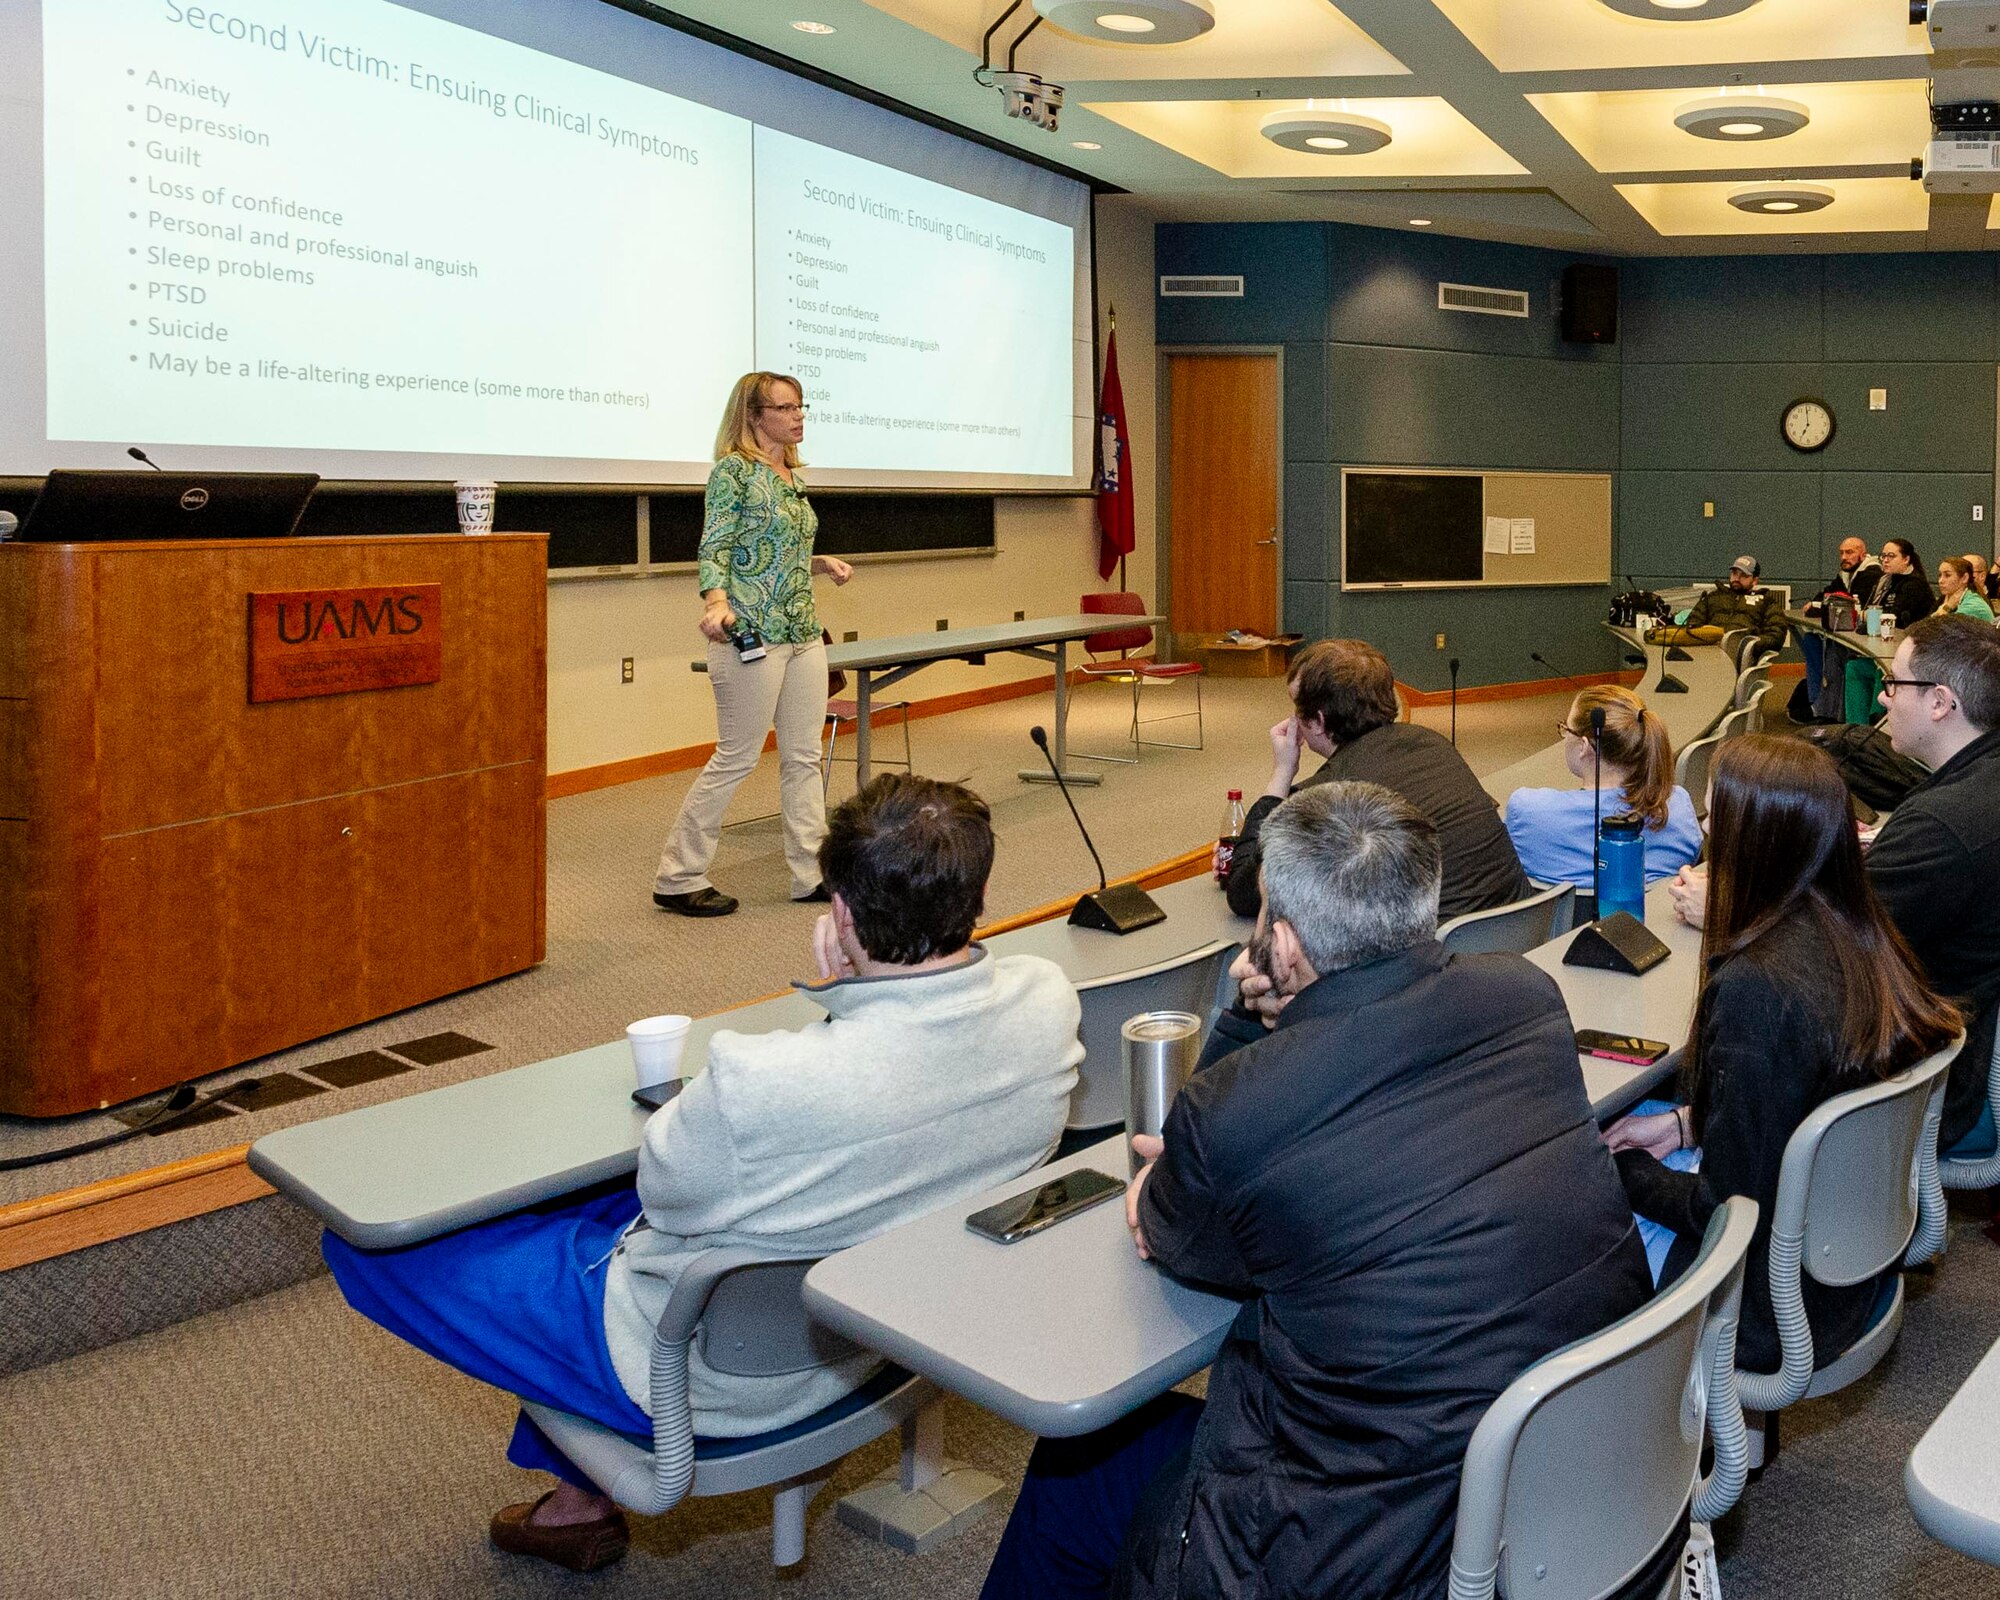 U.S. Air Force Reserve Lt. Col. Charlotte Appleton, 913th Aerospace Medicine Squadron commander, shared best practices and discussed resiliency to anesthesiology residents during weekly education presentations on Dec. 10, 2019, at University of Arkansas Medical School in Little Rock, Arkansas. (U.S. Air Force Reserve photo by Maj. Ashley Walker)